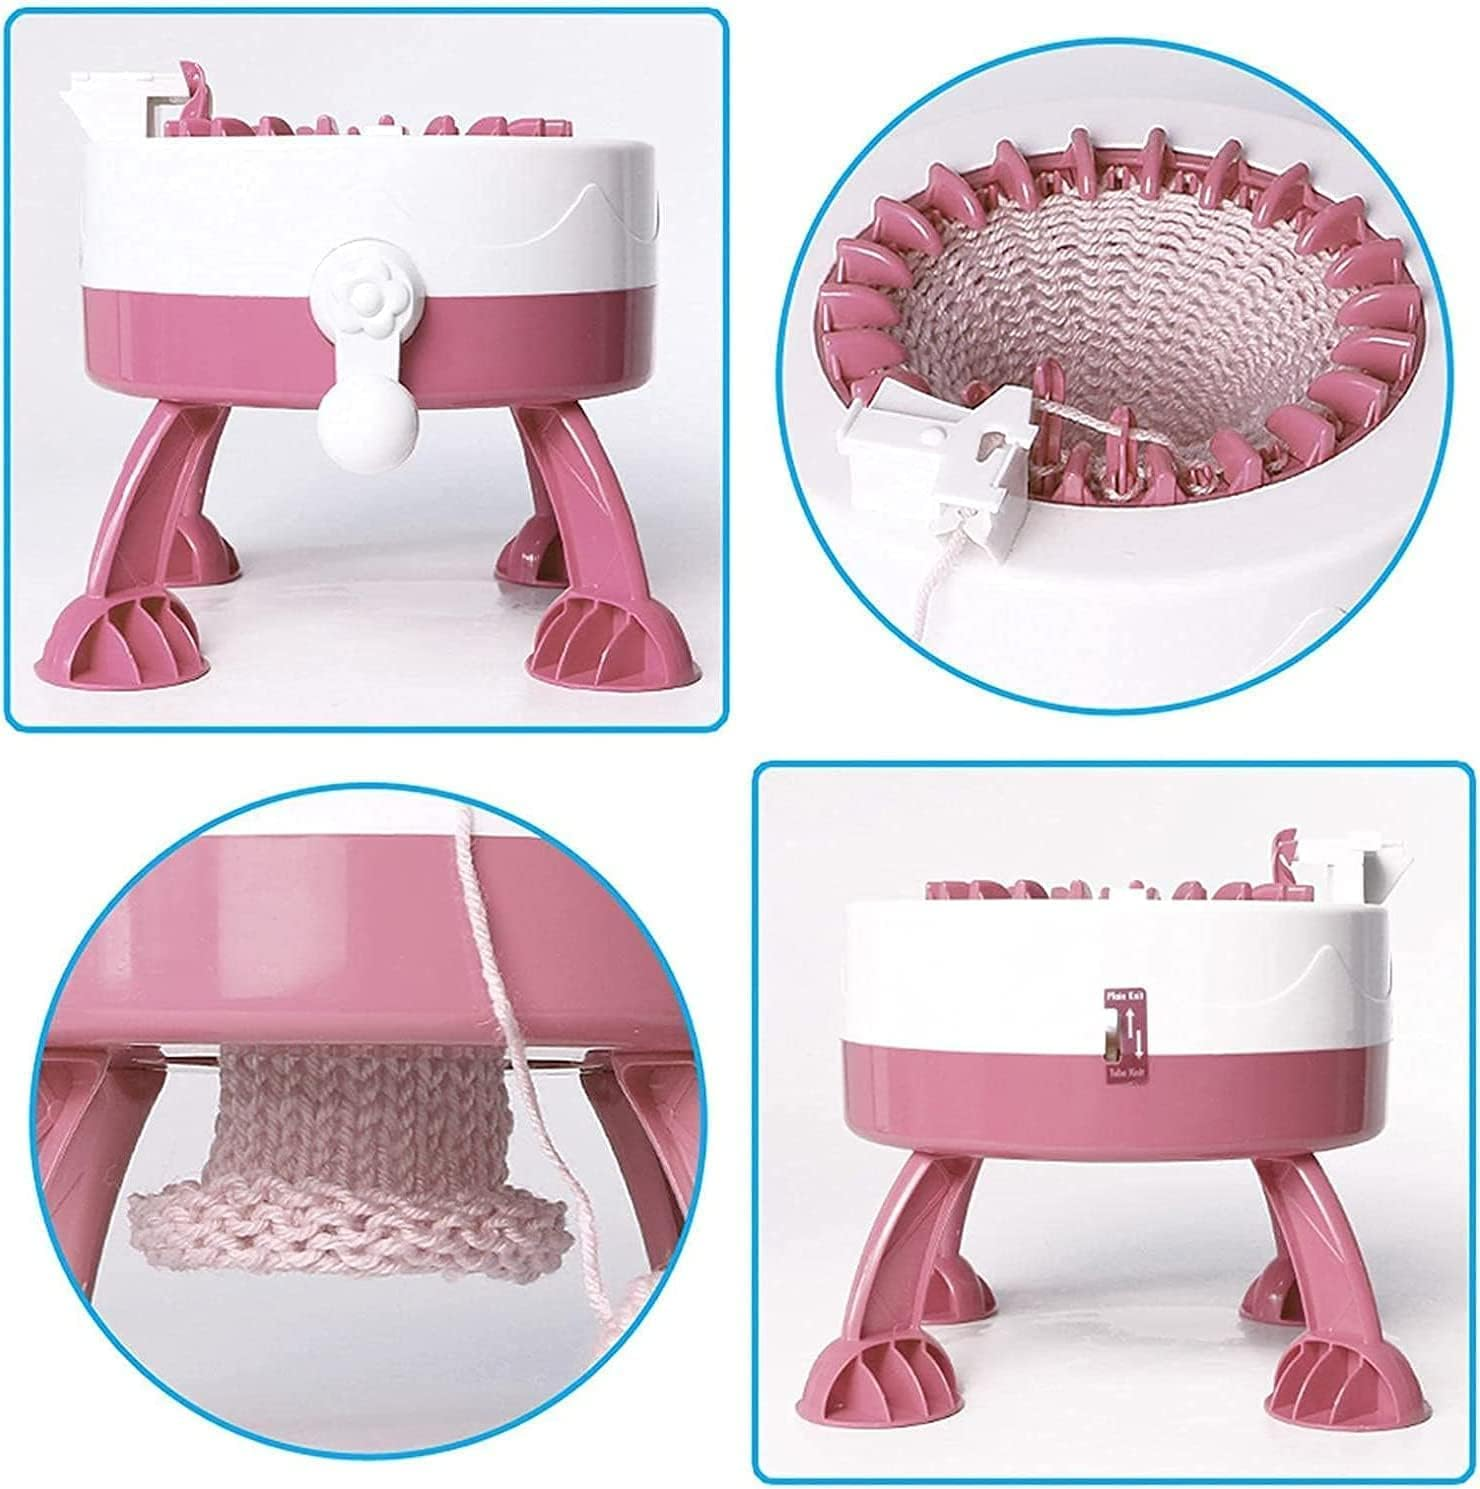 Get Started with Sentro Knitting Machine